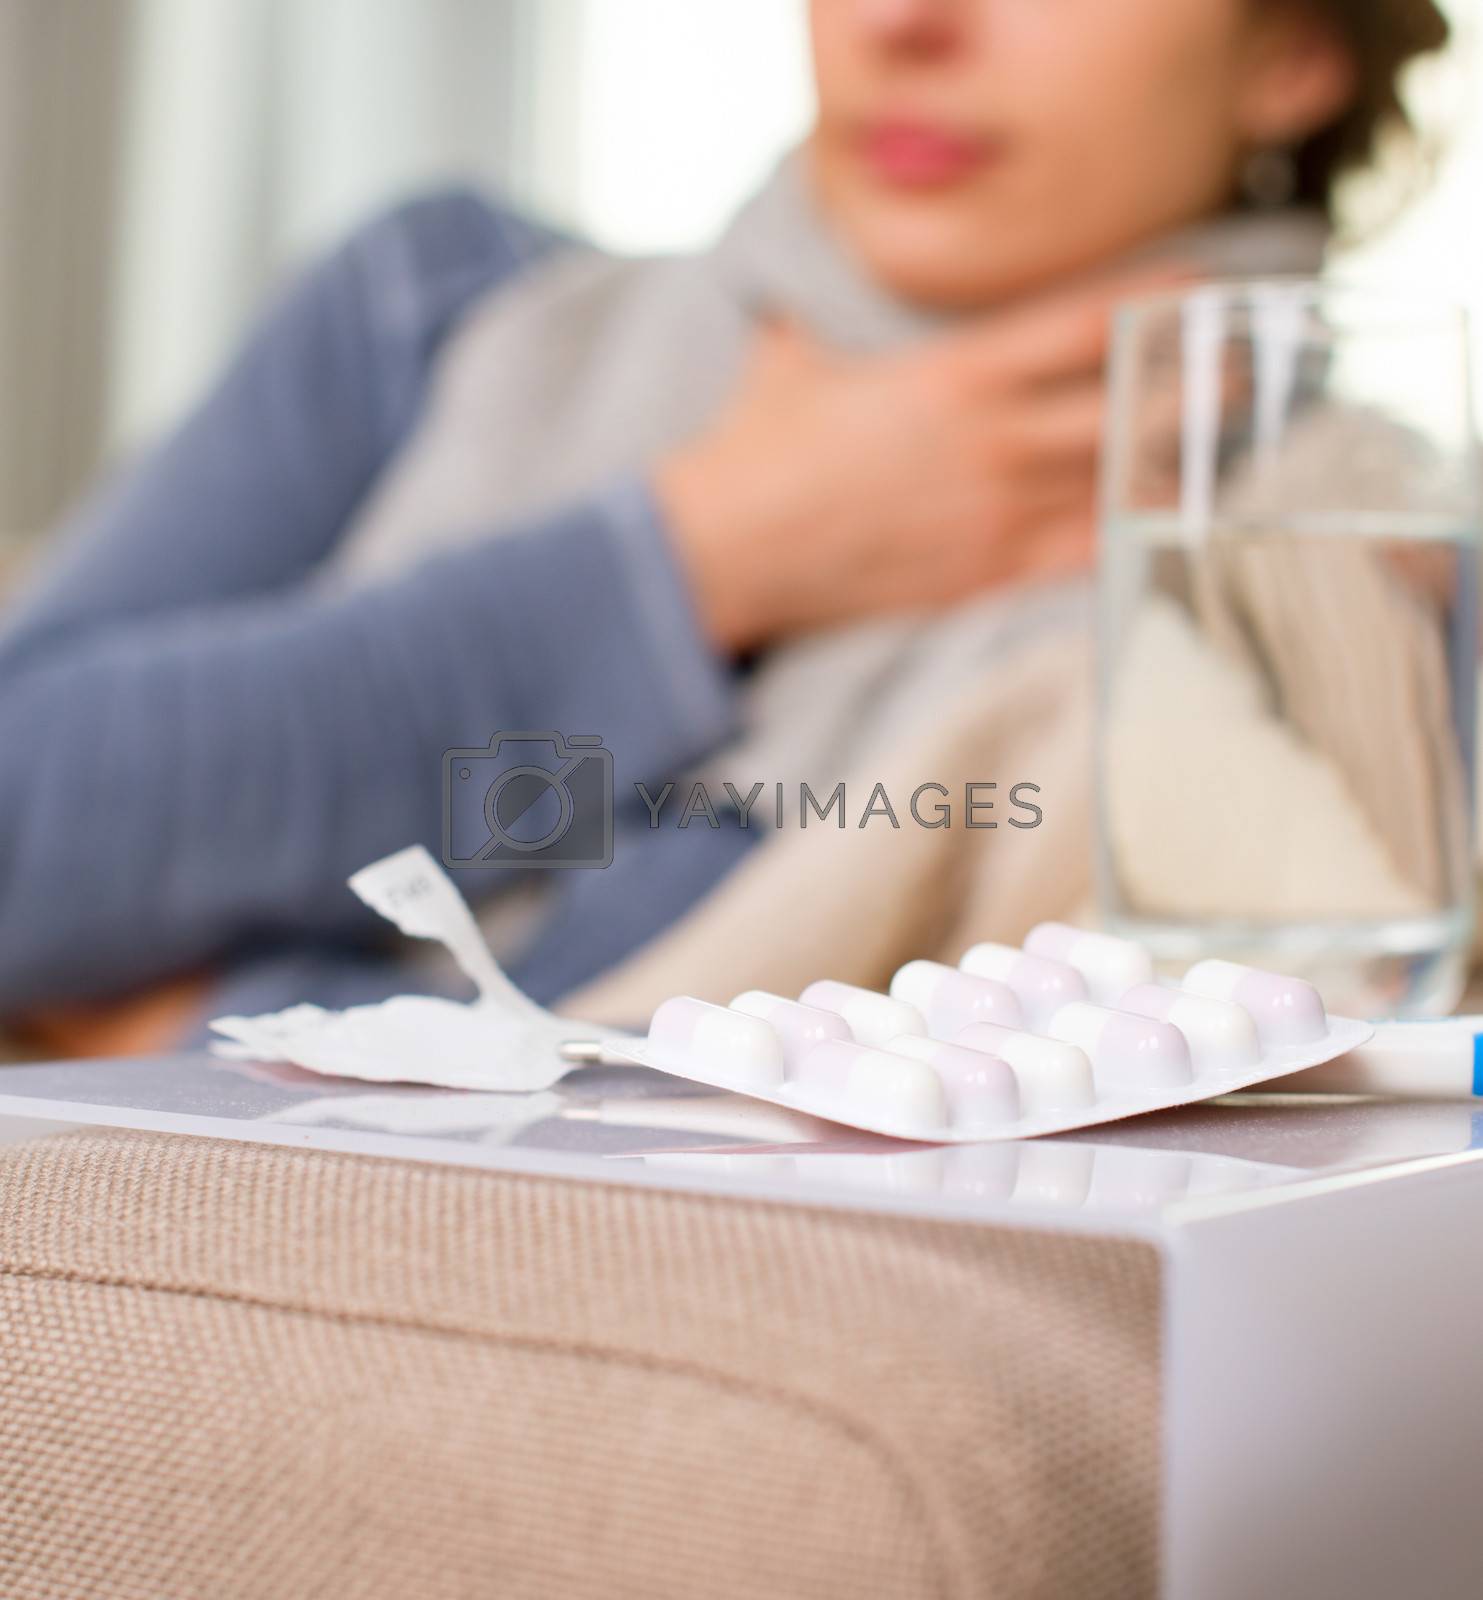 Royalty free image of Sick Woman. Flu. Woman Caught Cold by SubbotinaA